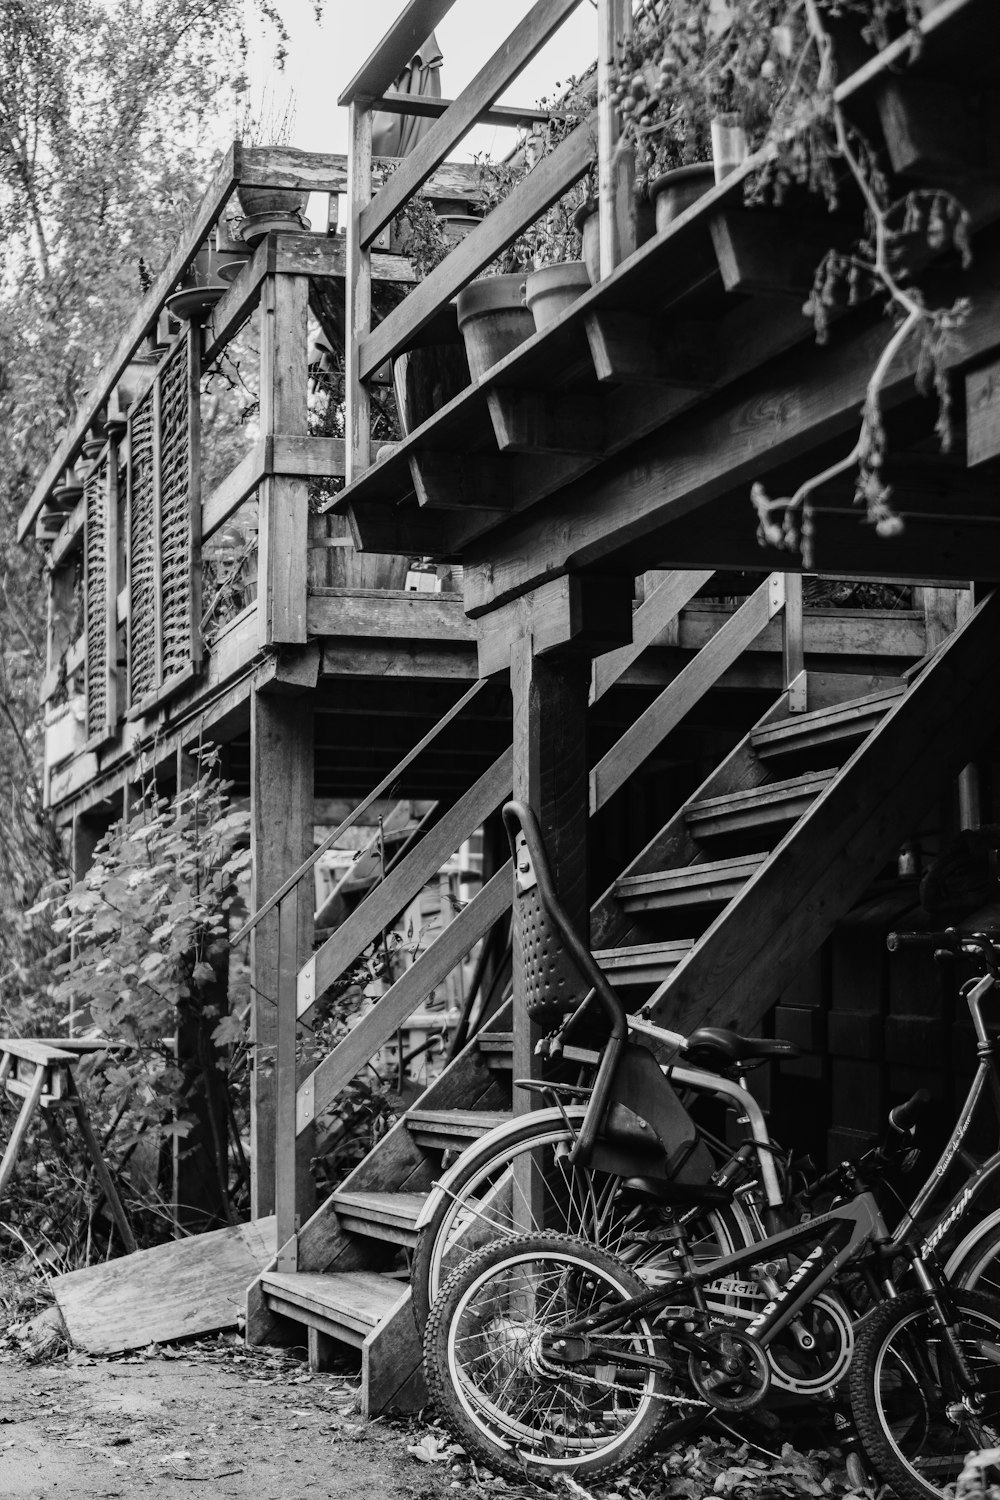 grayscale photography of bicycles under wooden stairs